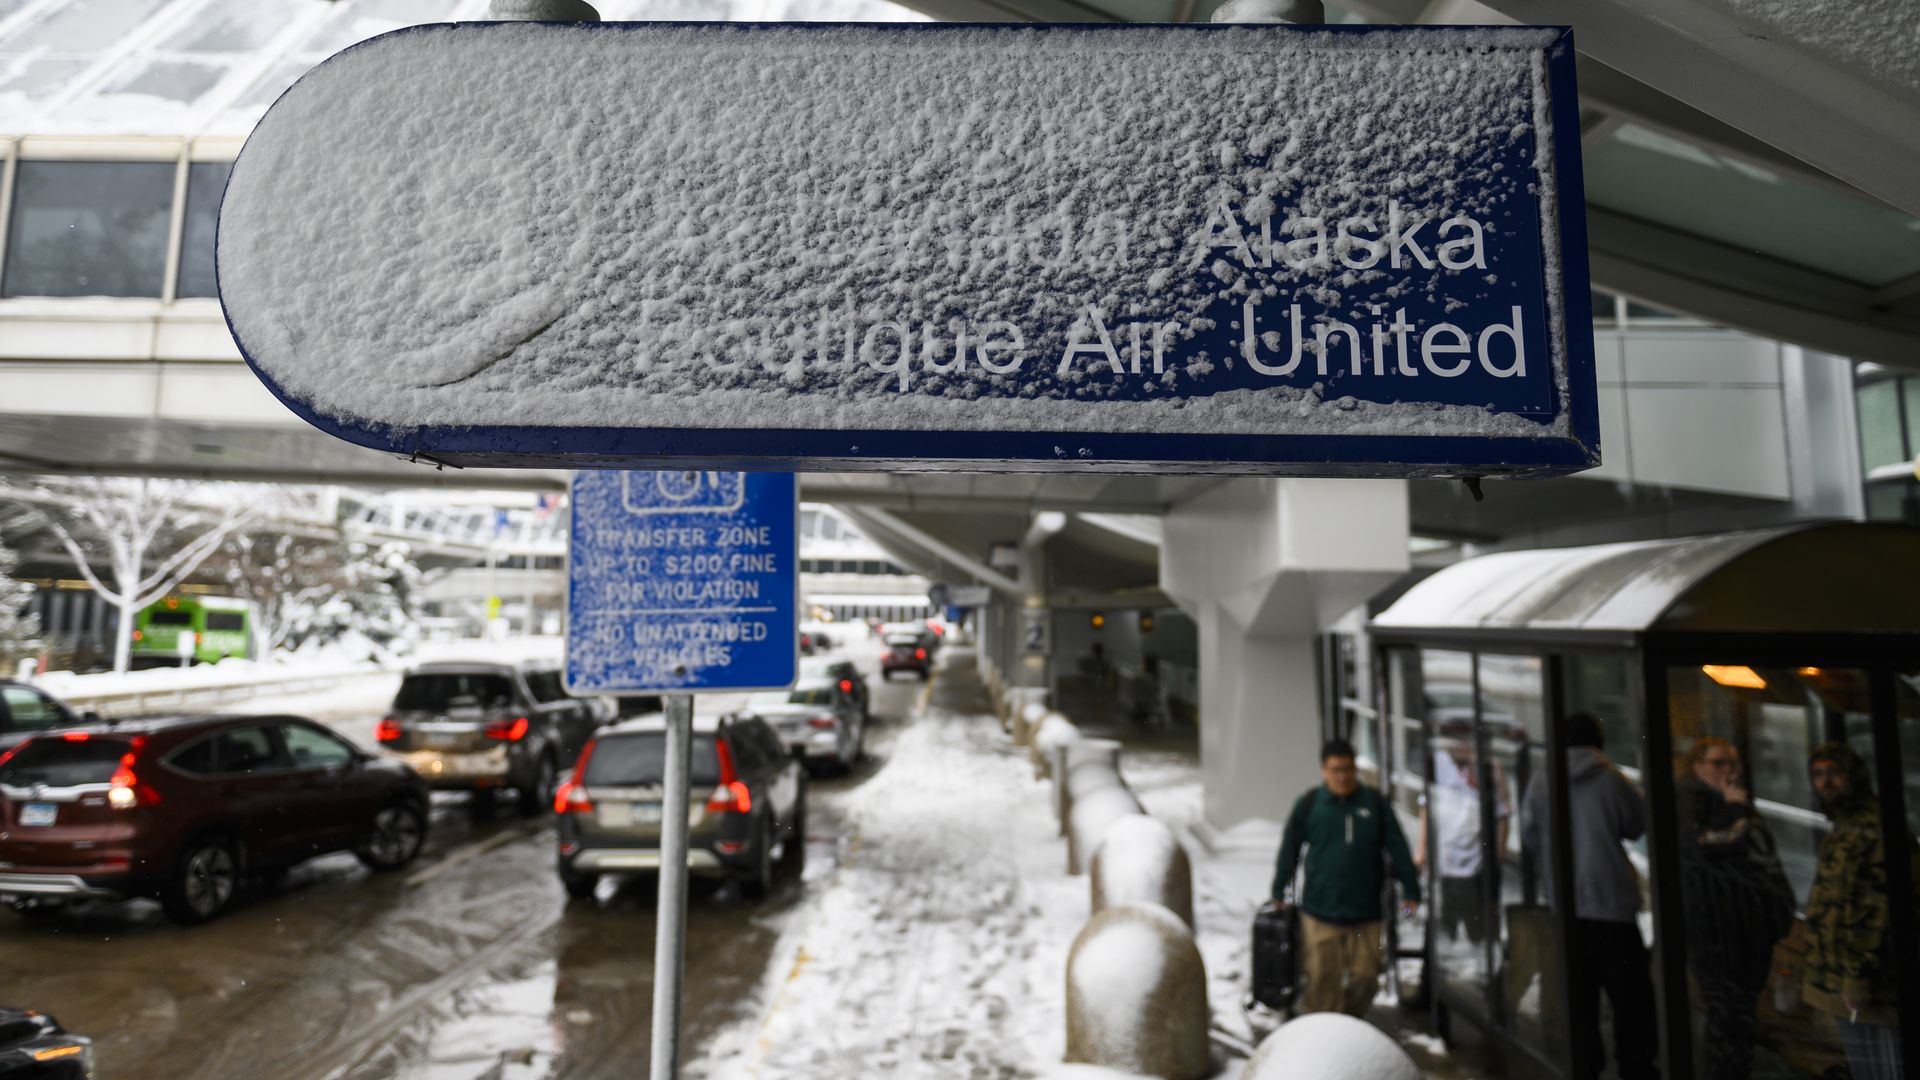  Signage outside Minneapolis-St. Paul International Airport is caked in snow after a blizzard struck overnight on November 27, 2019 in Bloomington, Minnesota. 